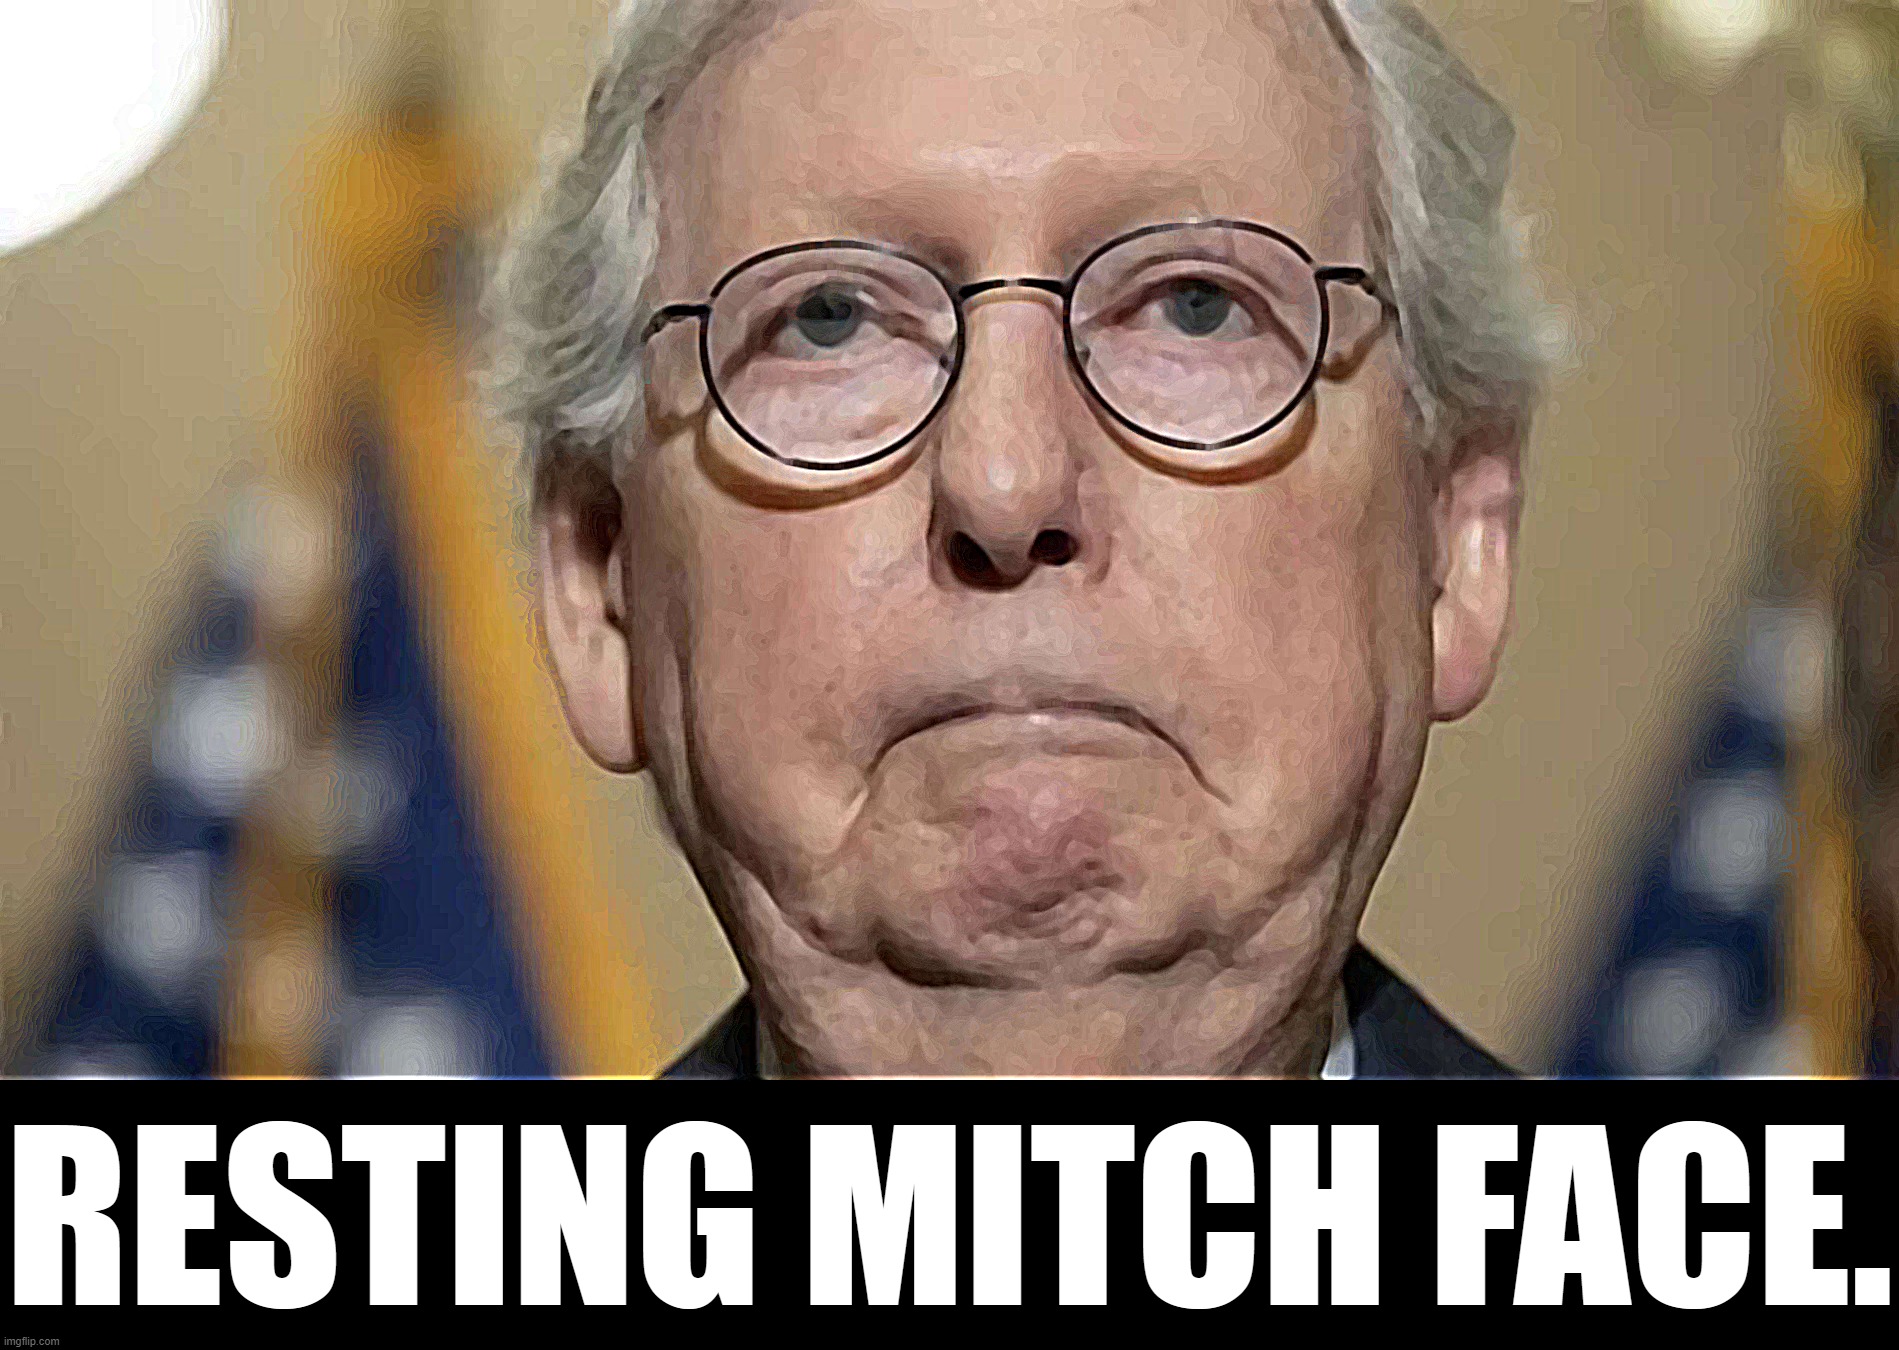 Resting Mitch face | RESTING MITCH FACE. | image tagged in resting mitch face | made w/ Imgflip meme maker